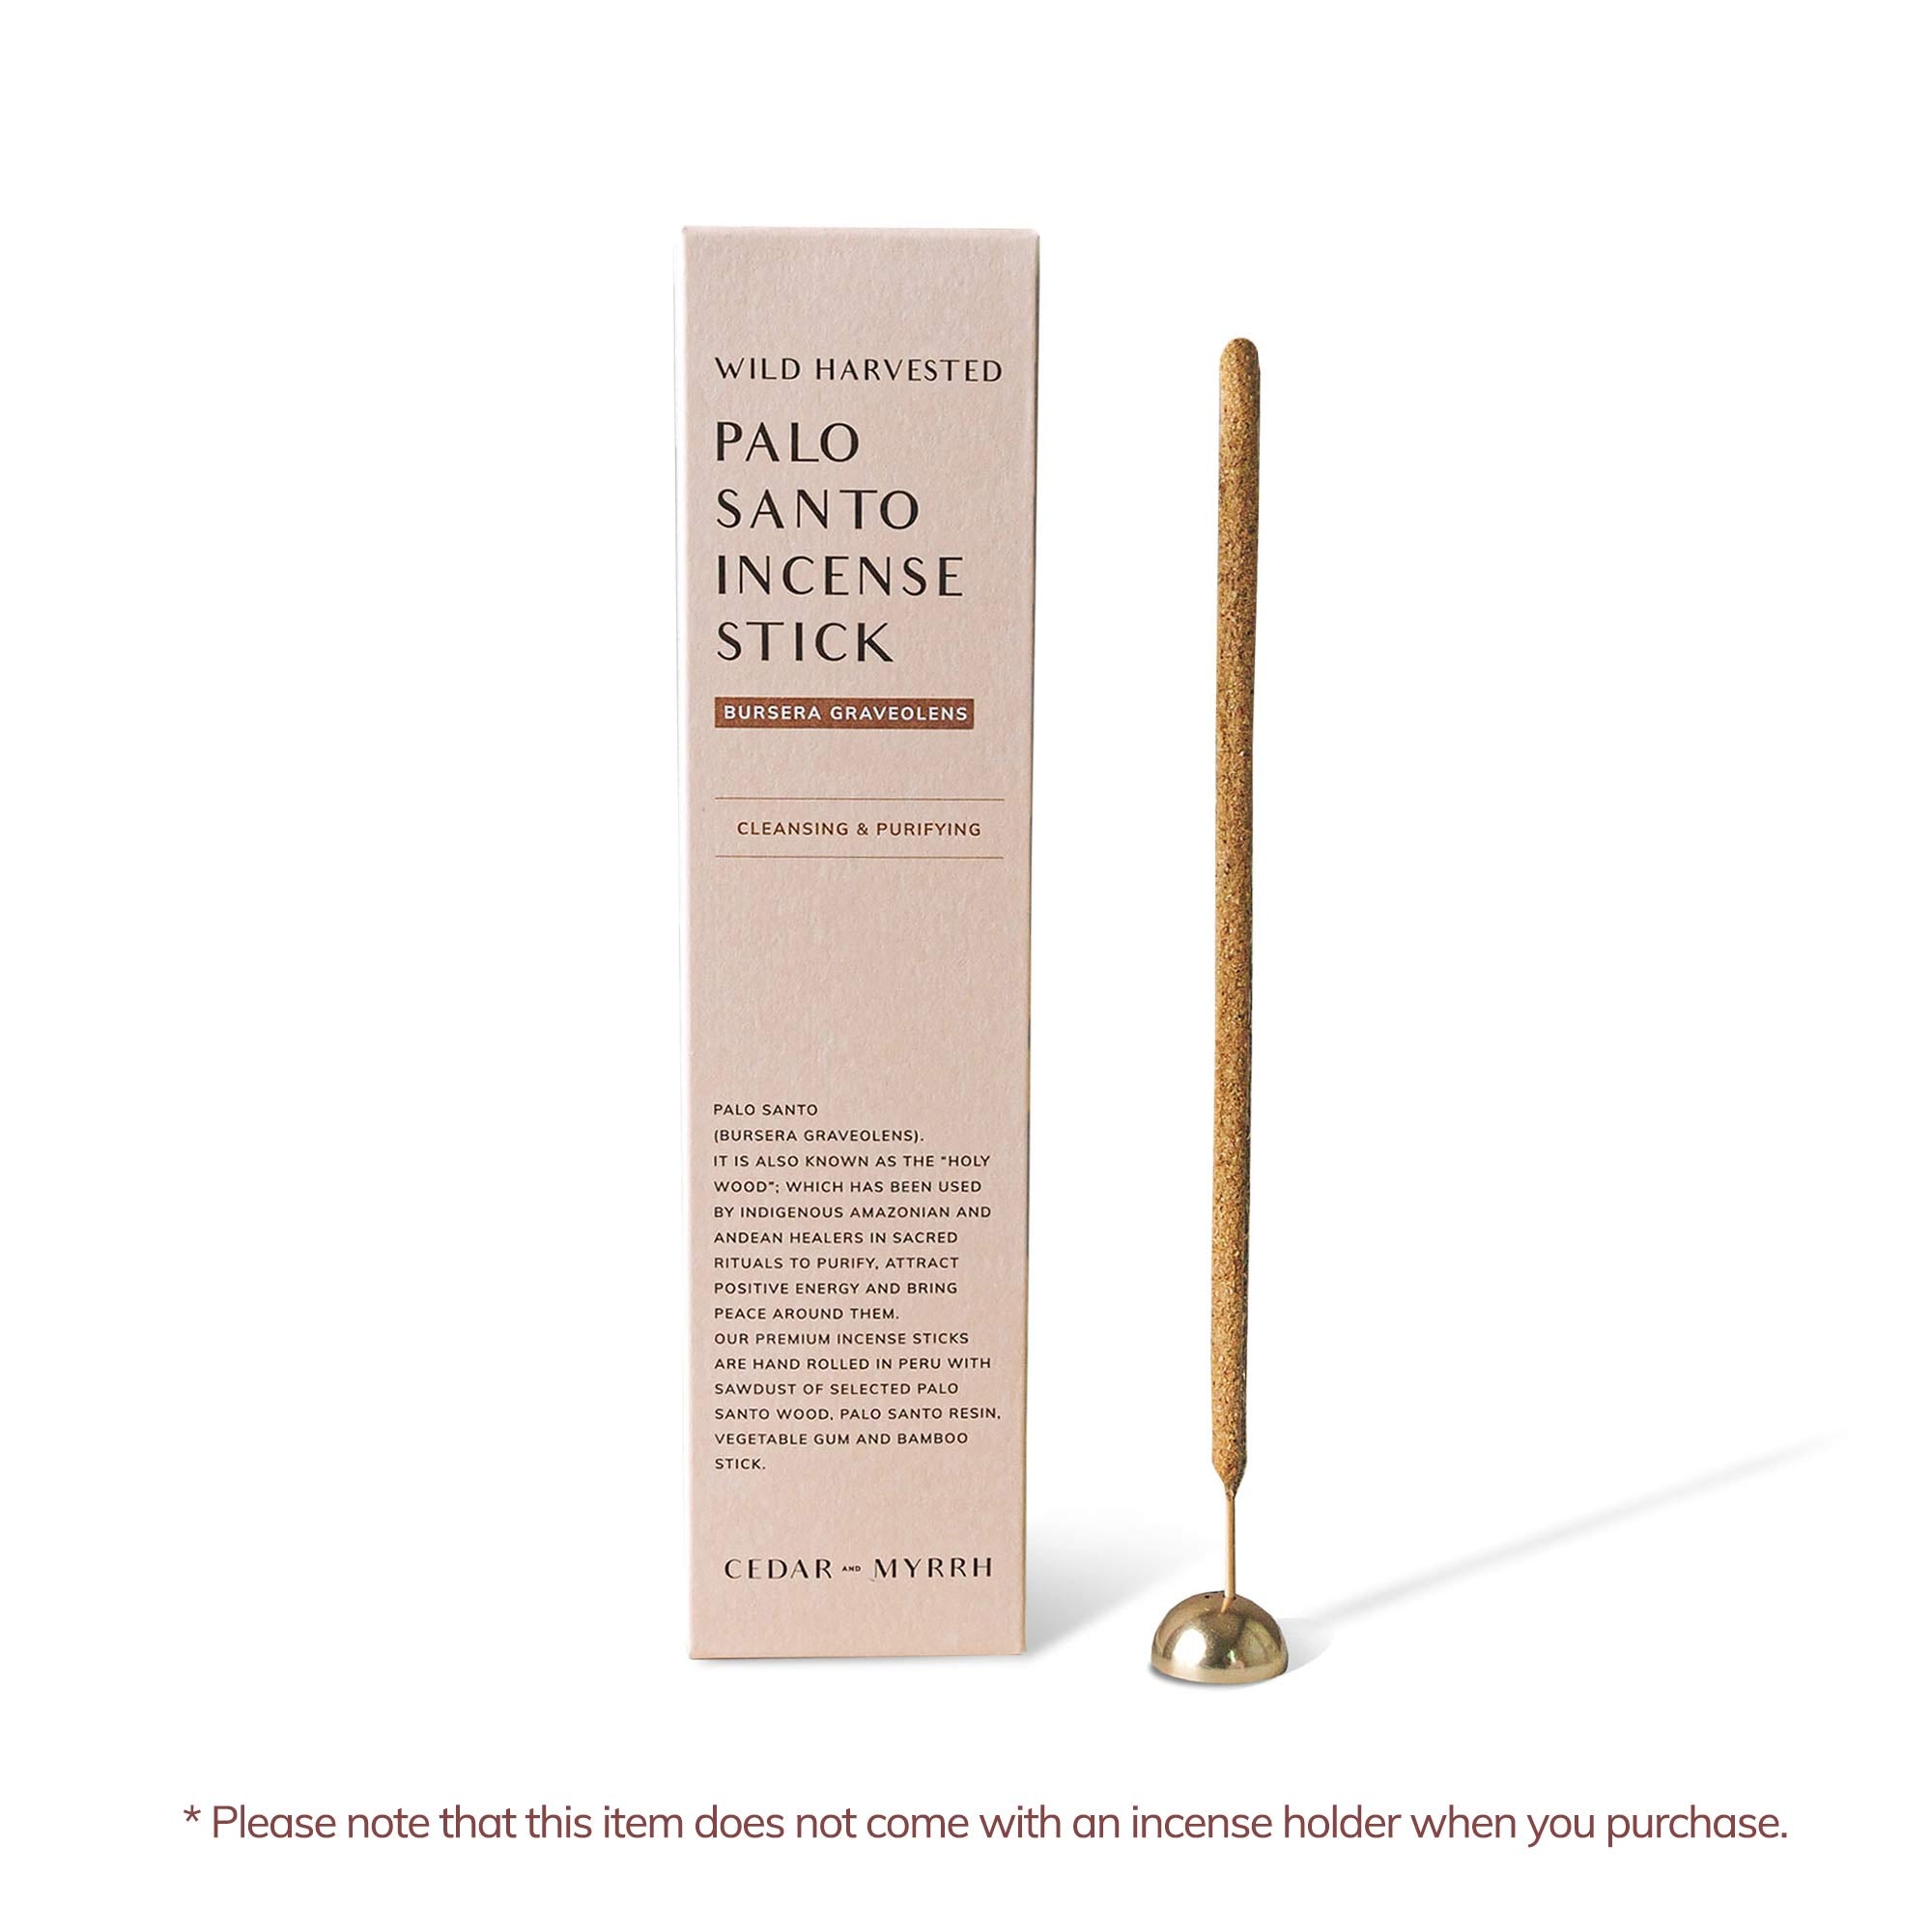 Incense made with palo santo and the package.